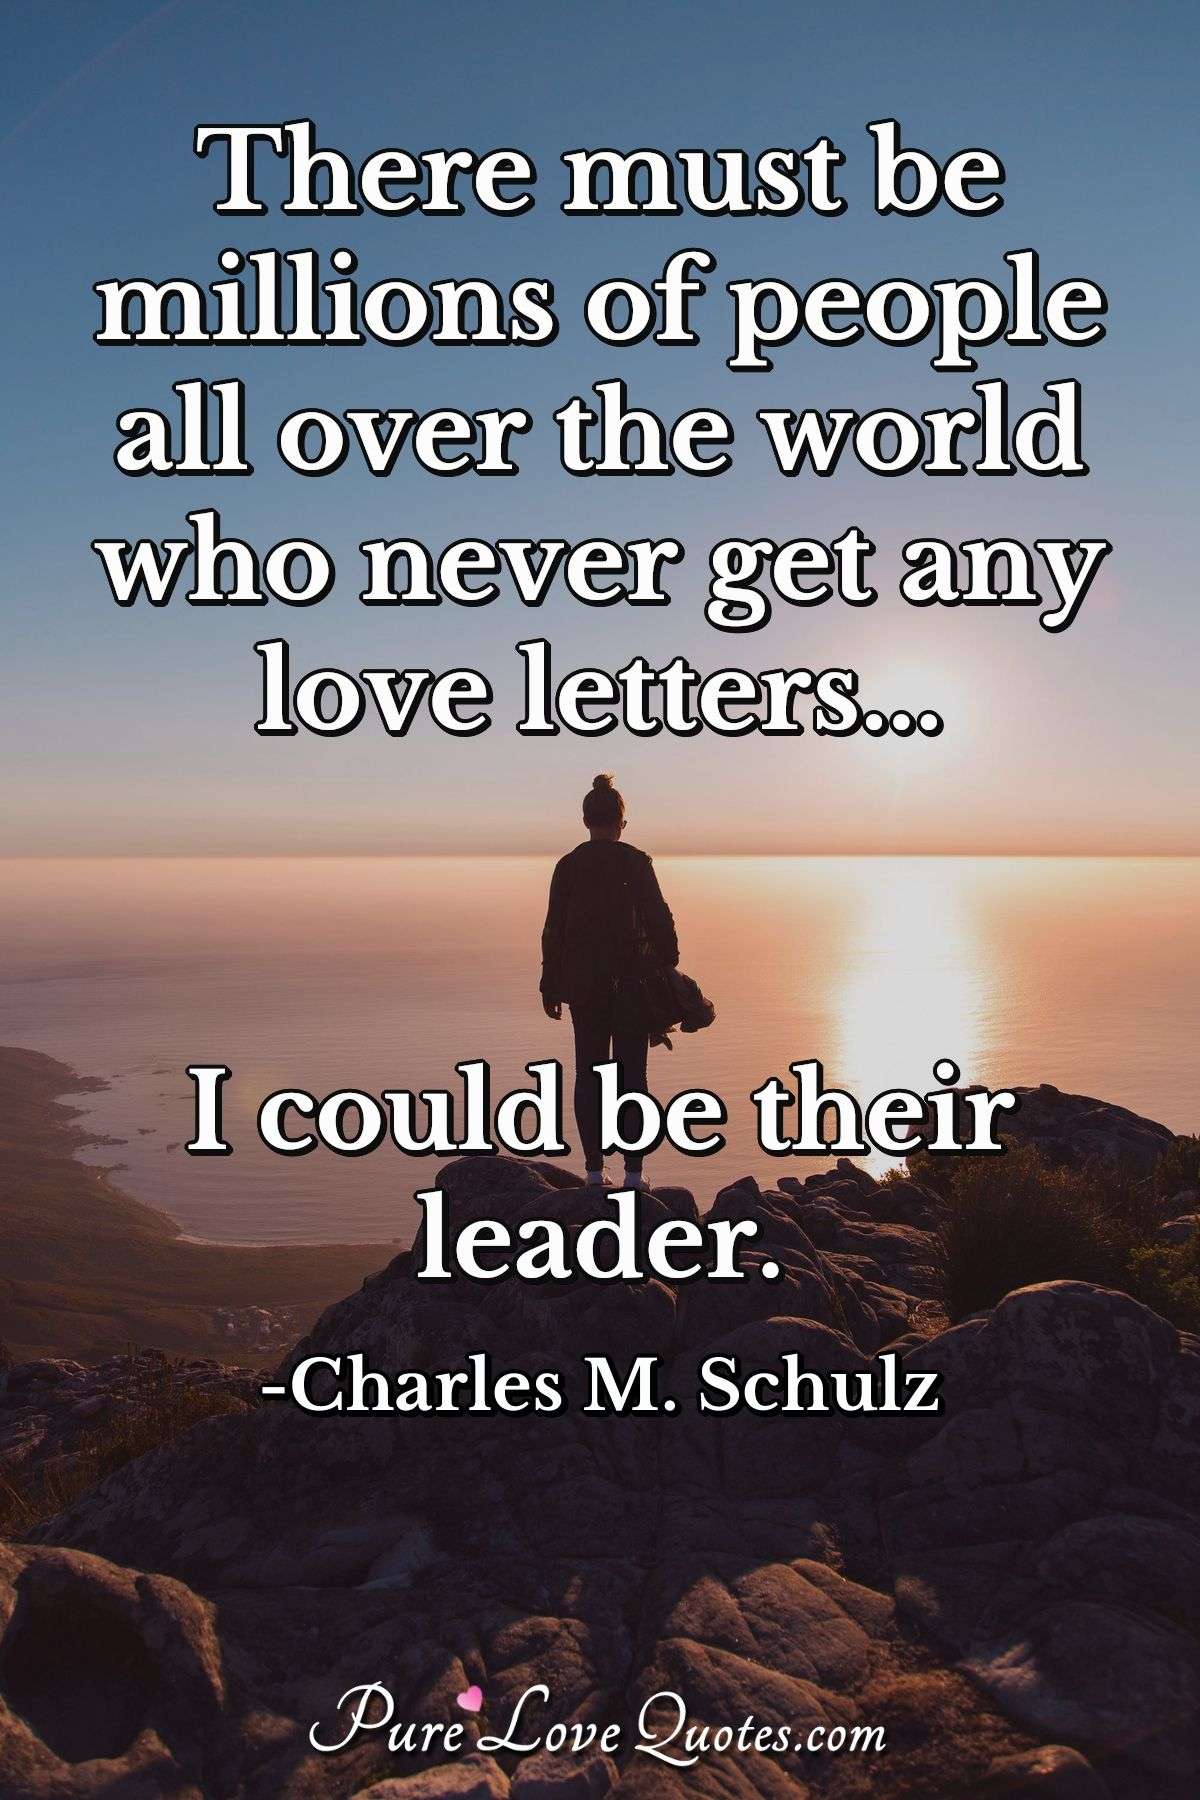 There must be millions of people all over the world who never get any love letters... I could be their leader. - Charles M. Schulz